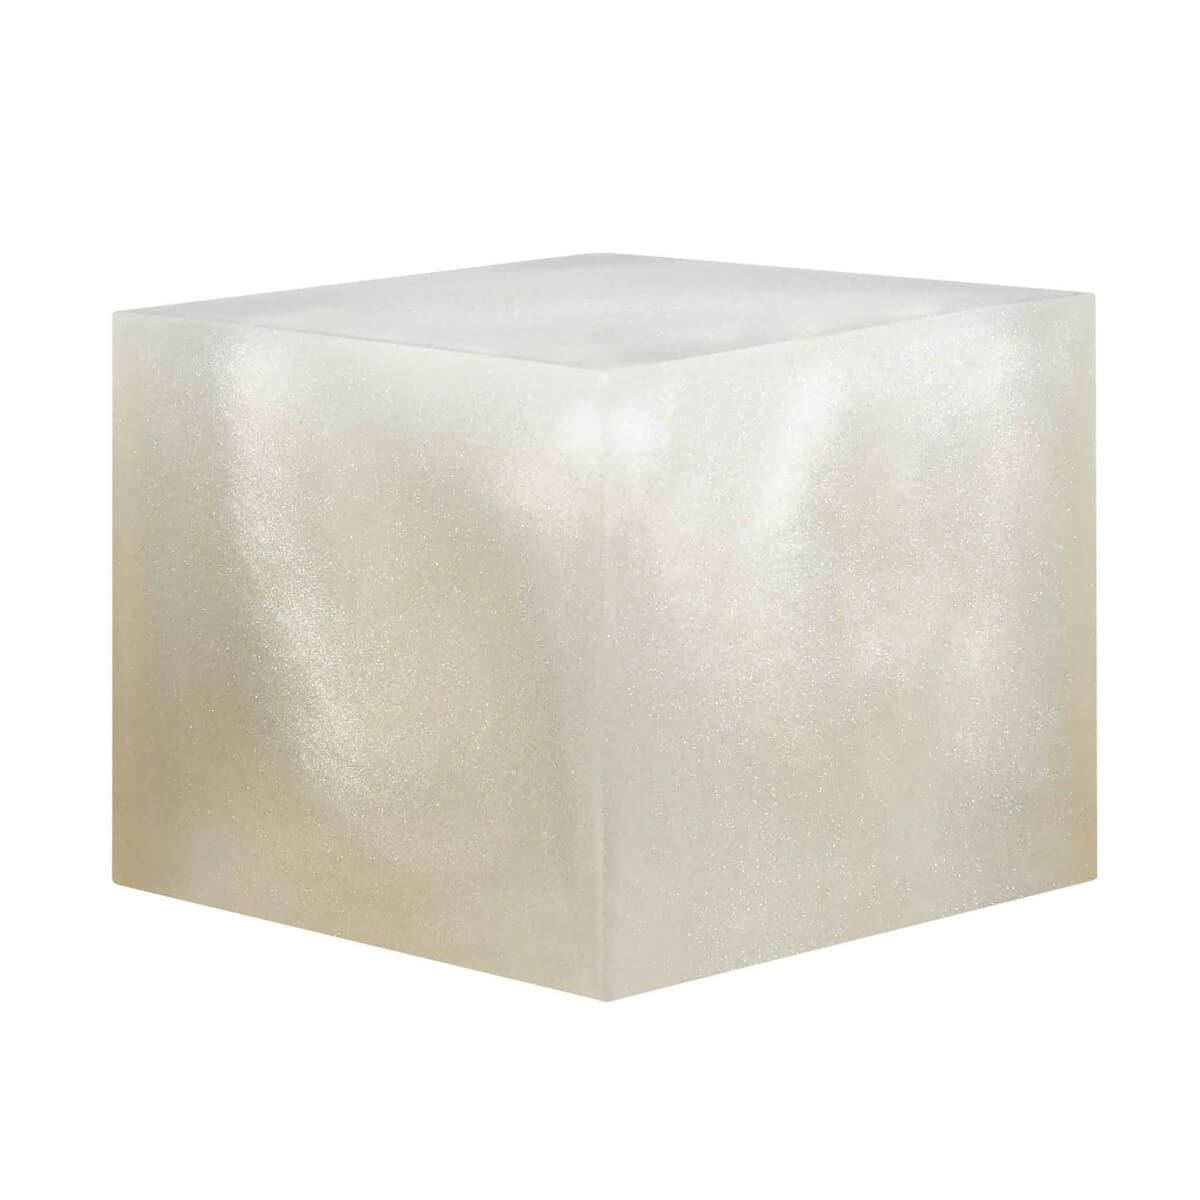 A resin cube made with the Snow Queen Mica Powder Pigment by Pigmently.